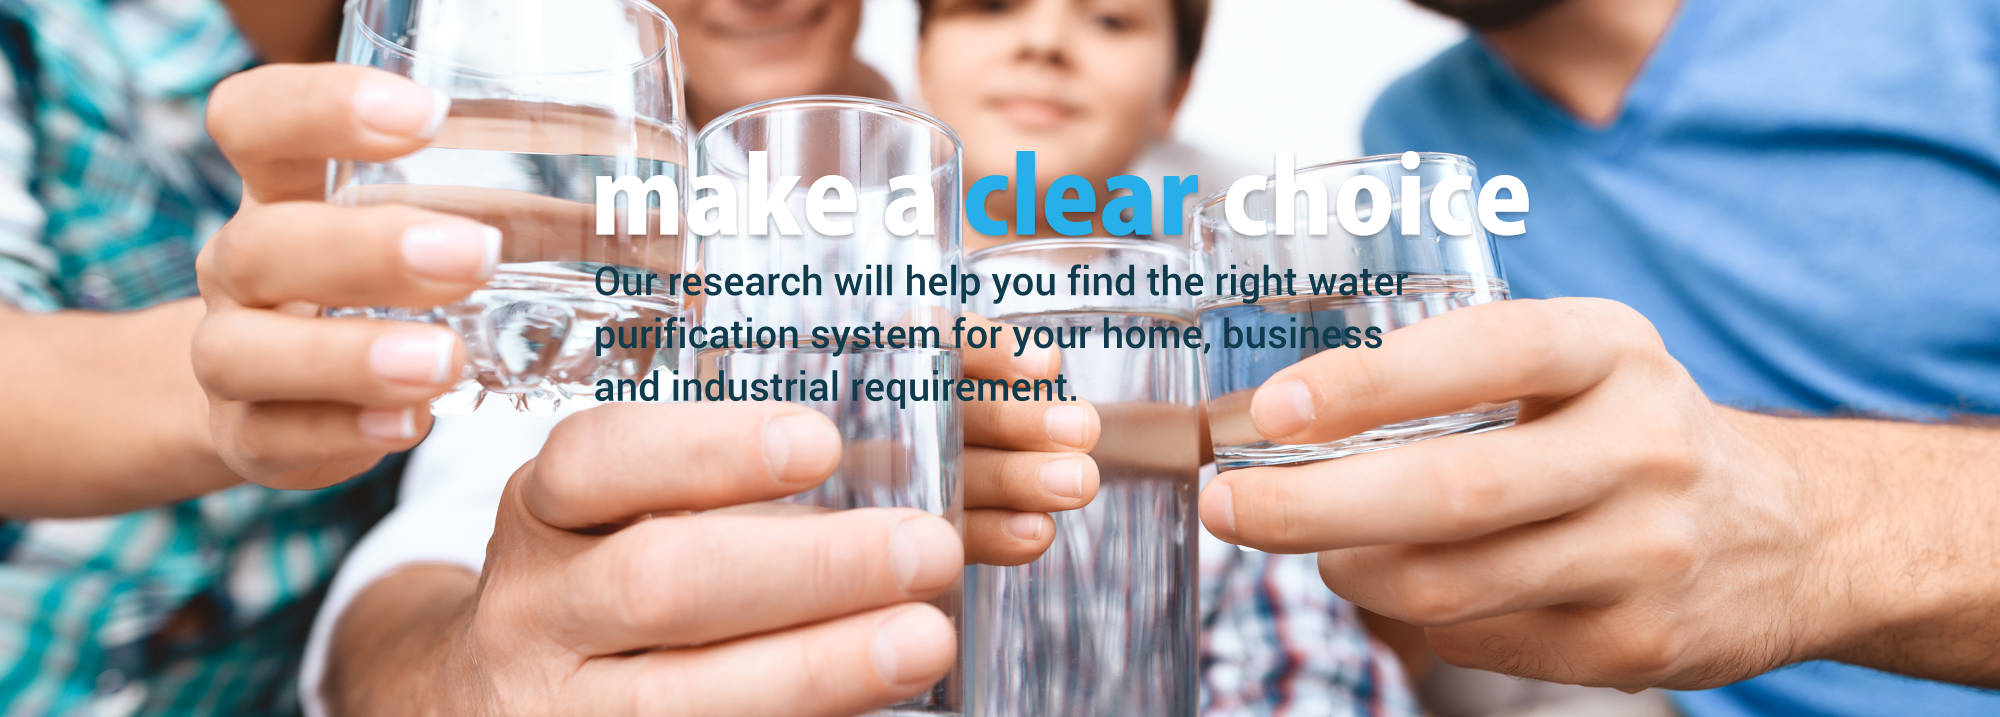 water filtration research make a clear choice